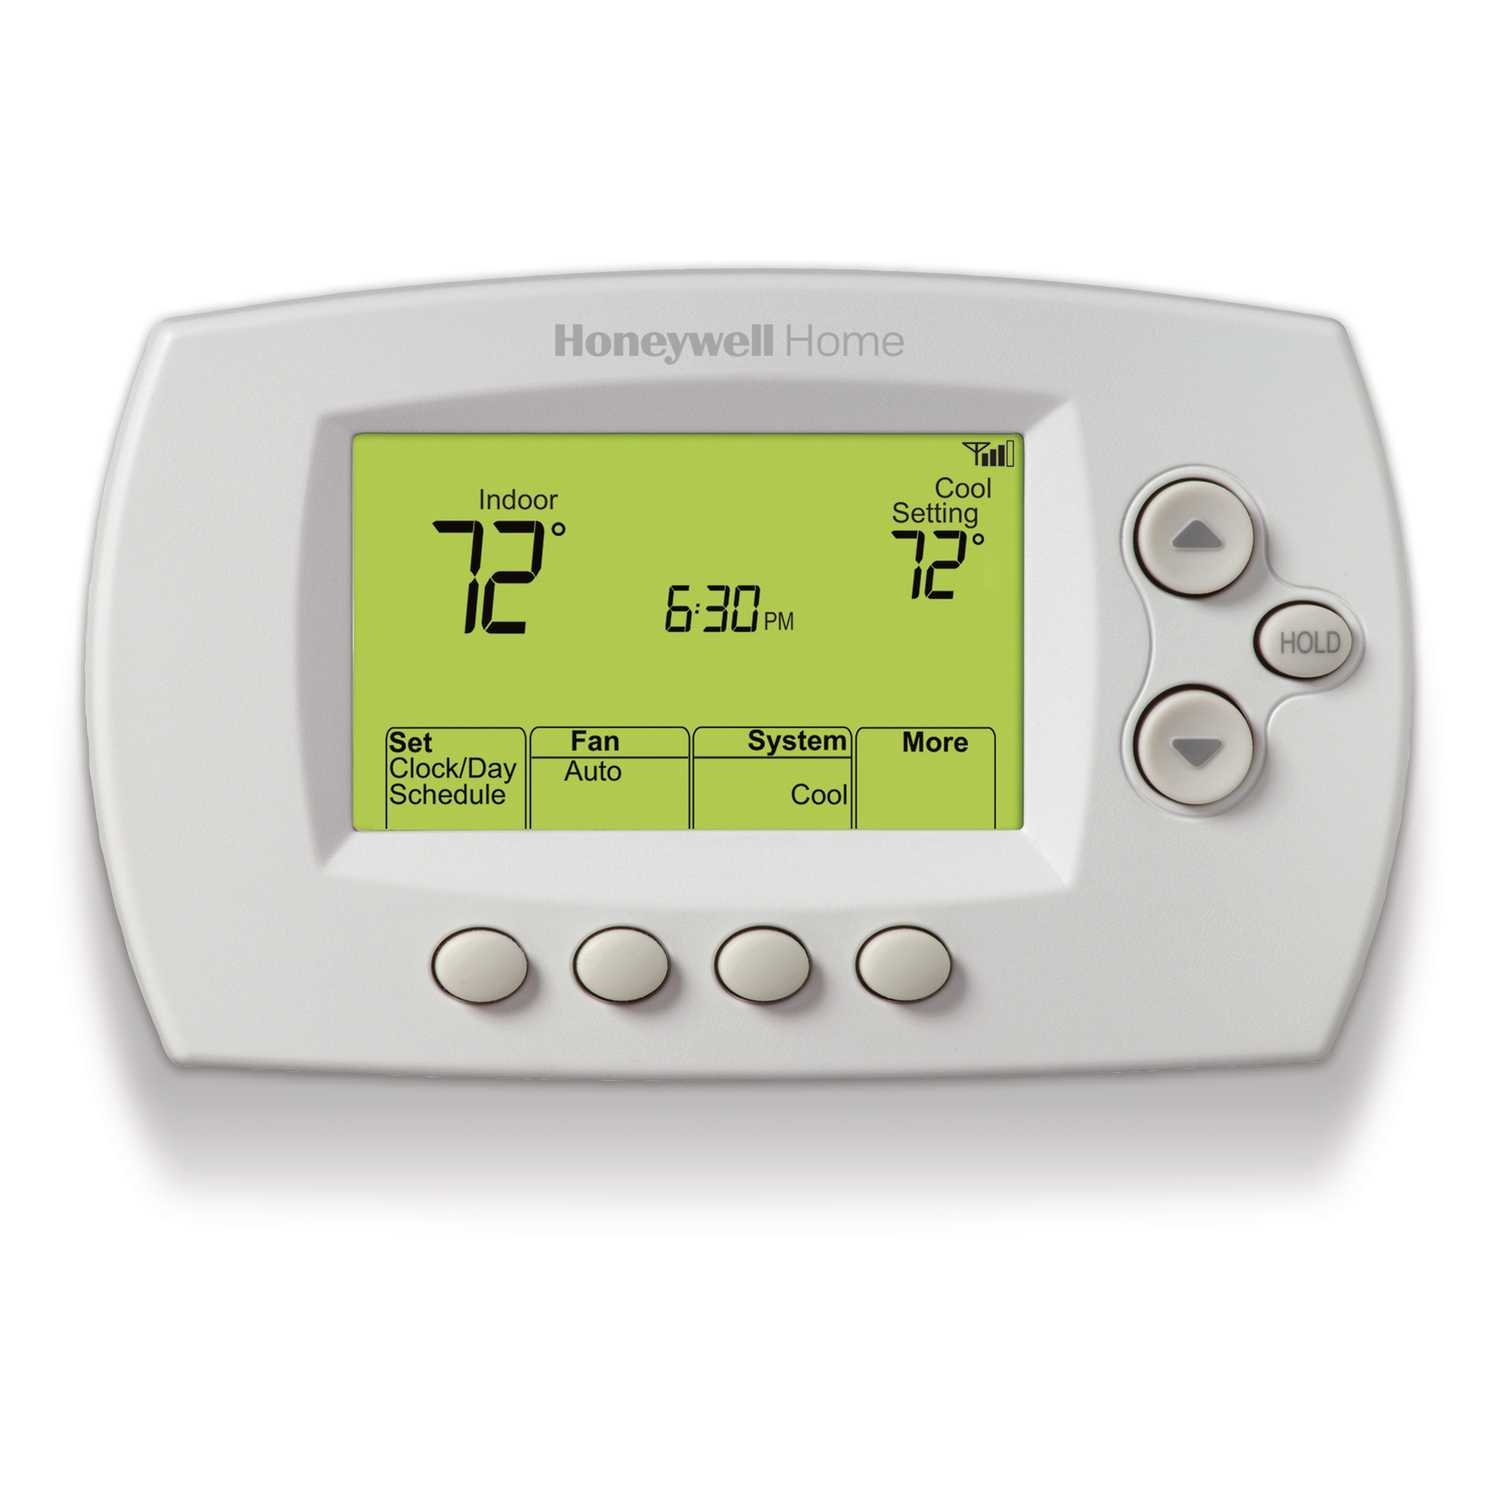 Thermostats and Heating Supplies